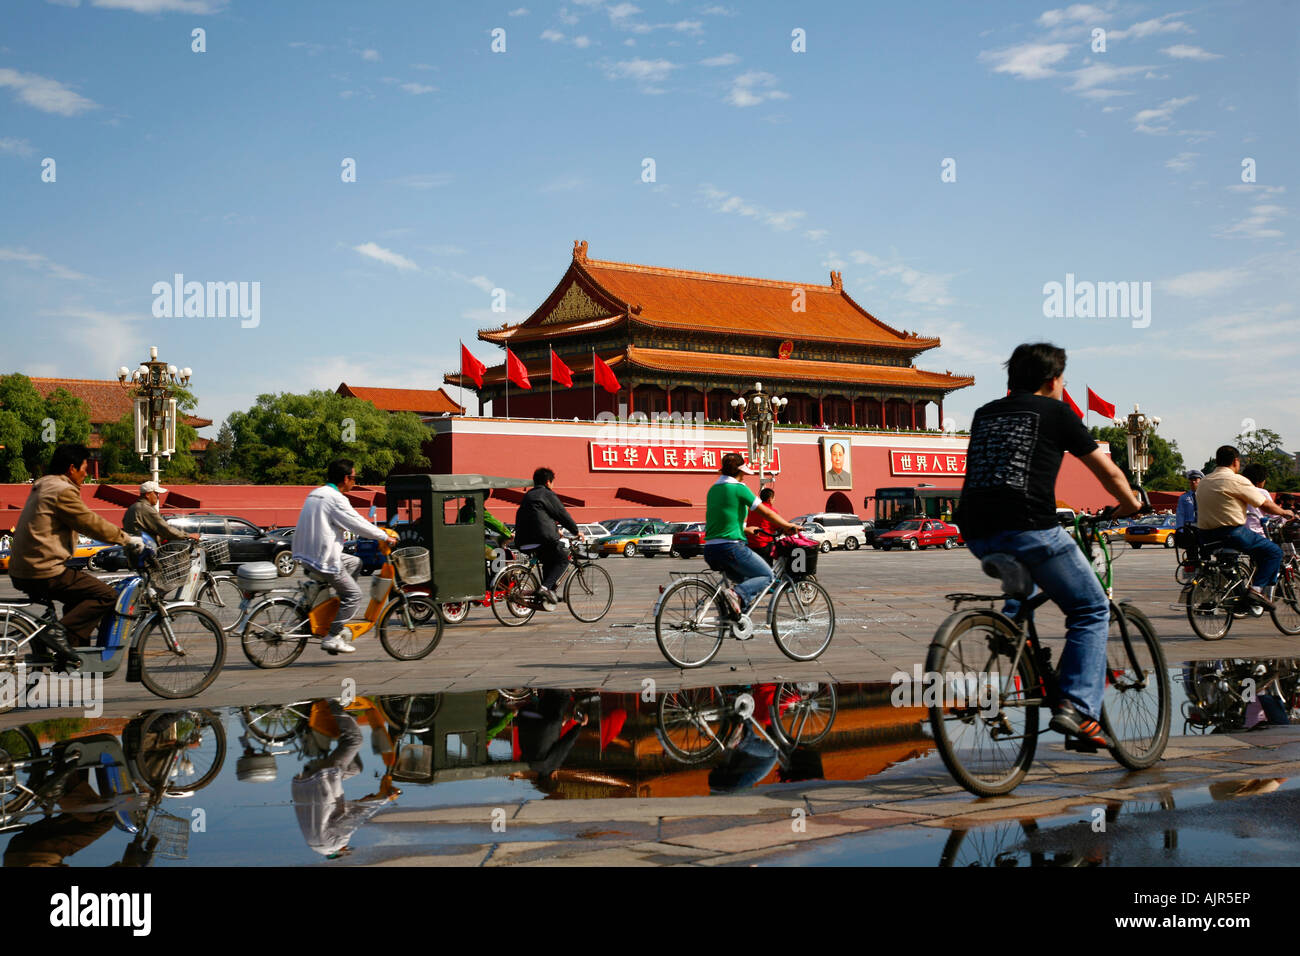 Bicycles passing by the Gate of heavenly peace the Forbidden city Tiananmen square Beijing China Stock Photo